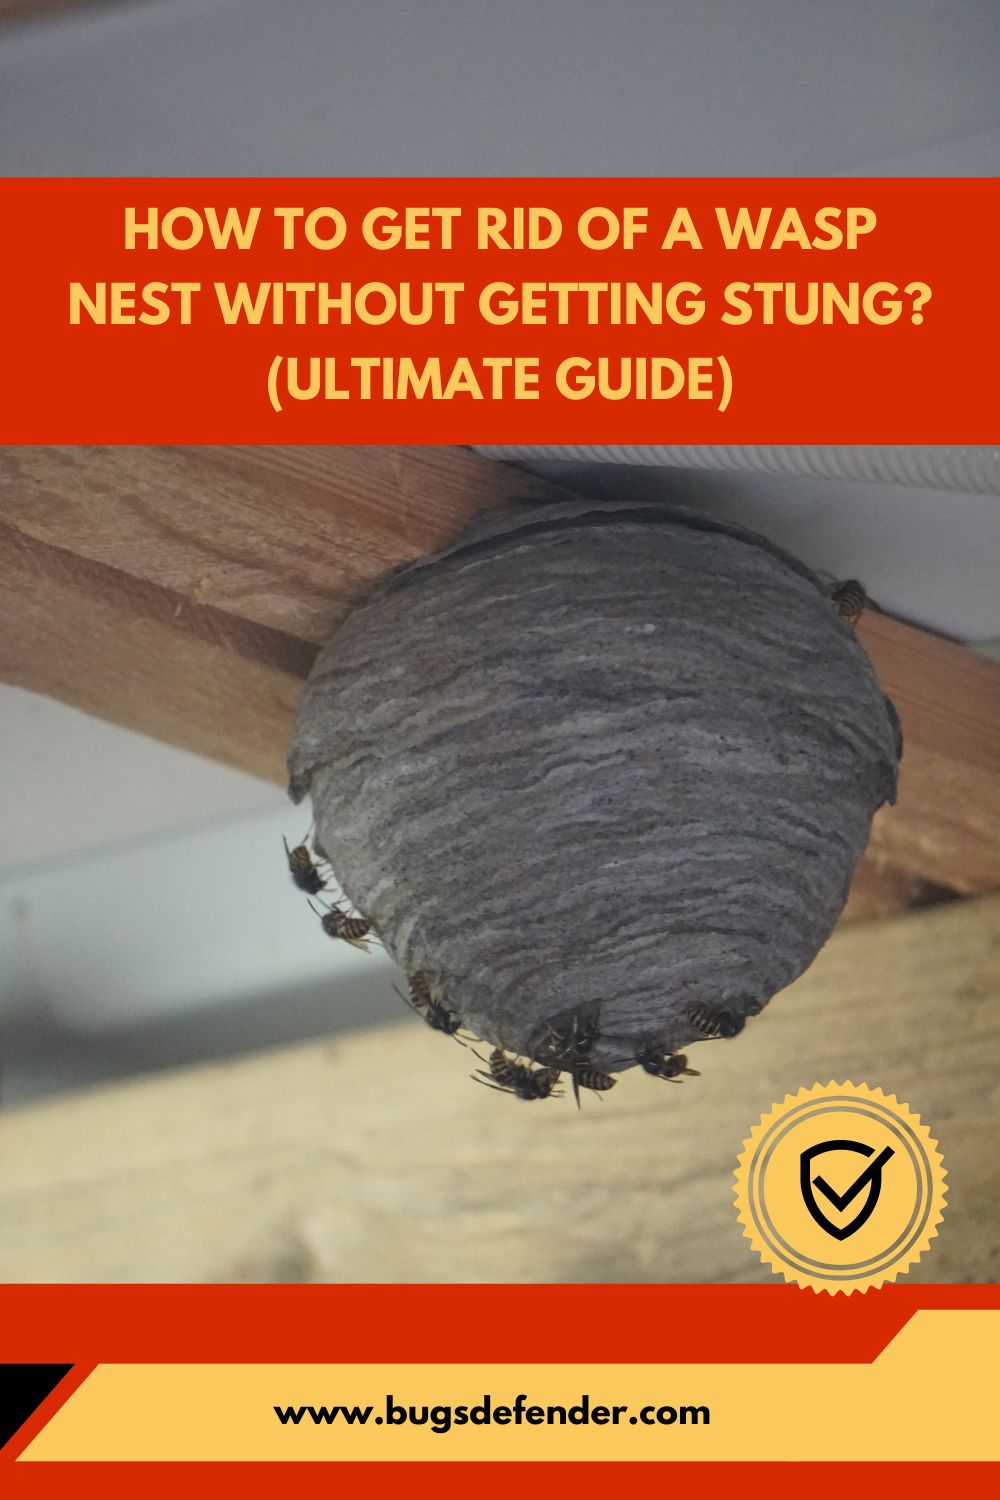 How To Get Rid Of A Wasp Nest Without Getting Stung pin2